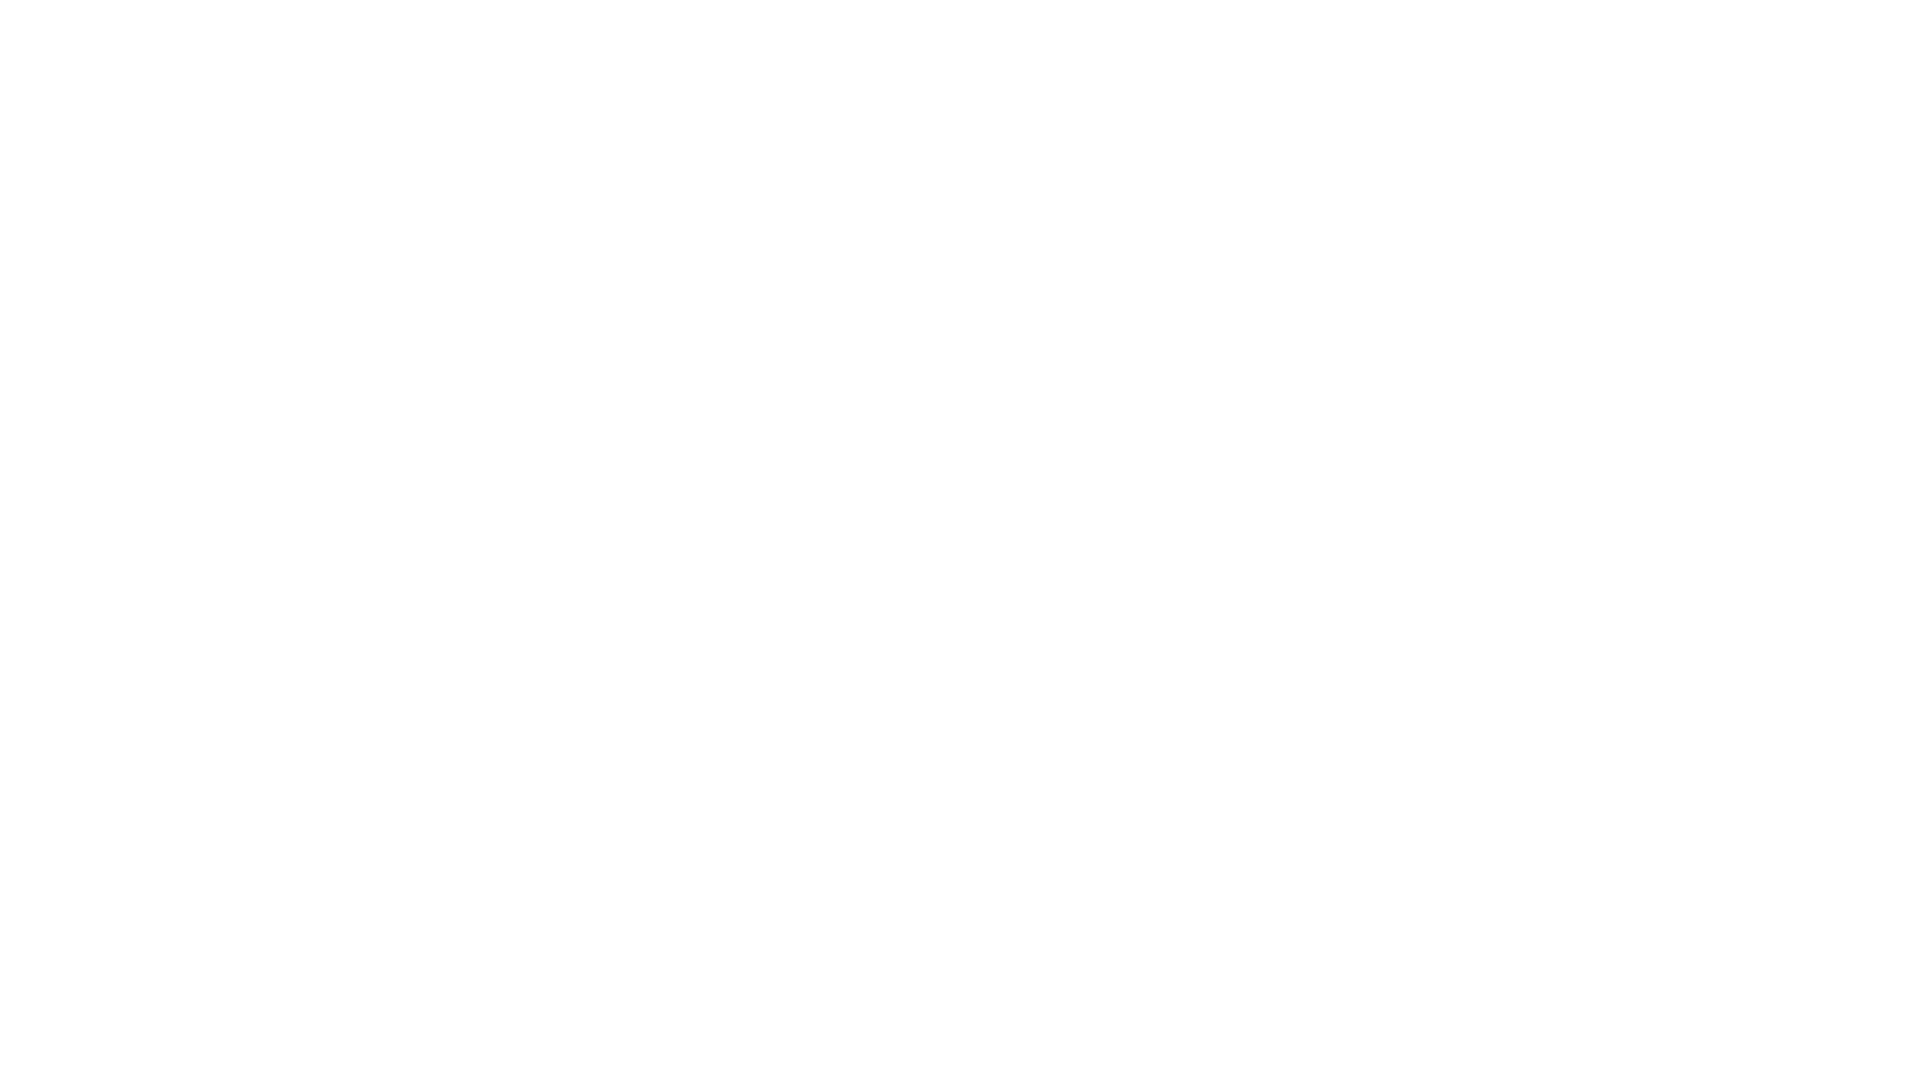 Tenth Power Media Group